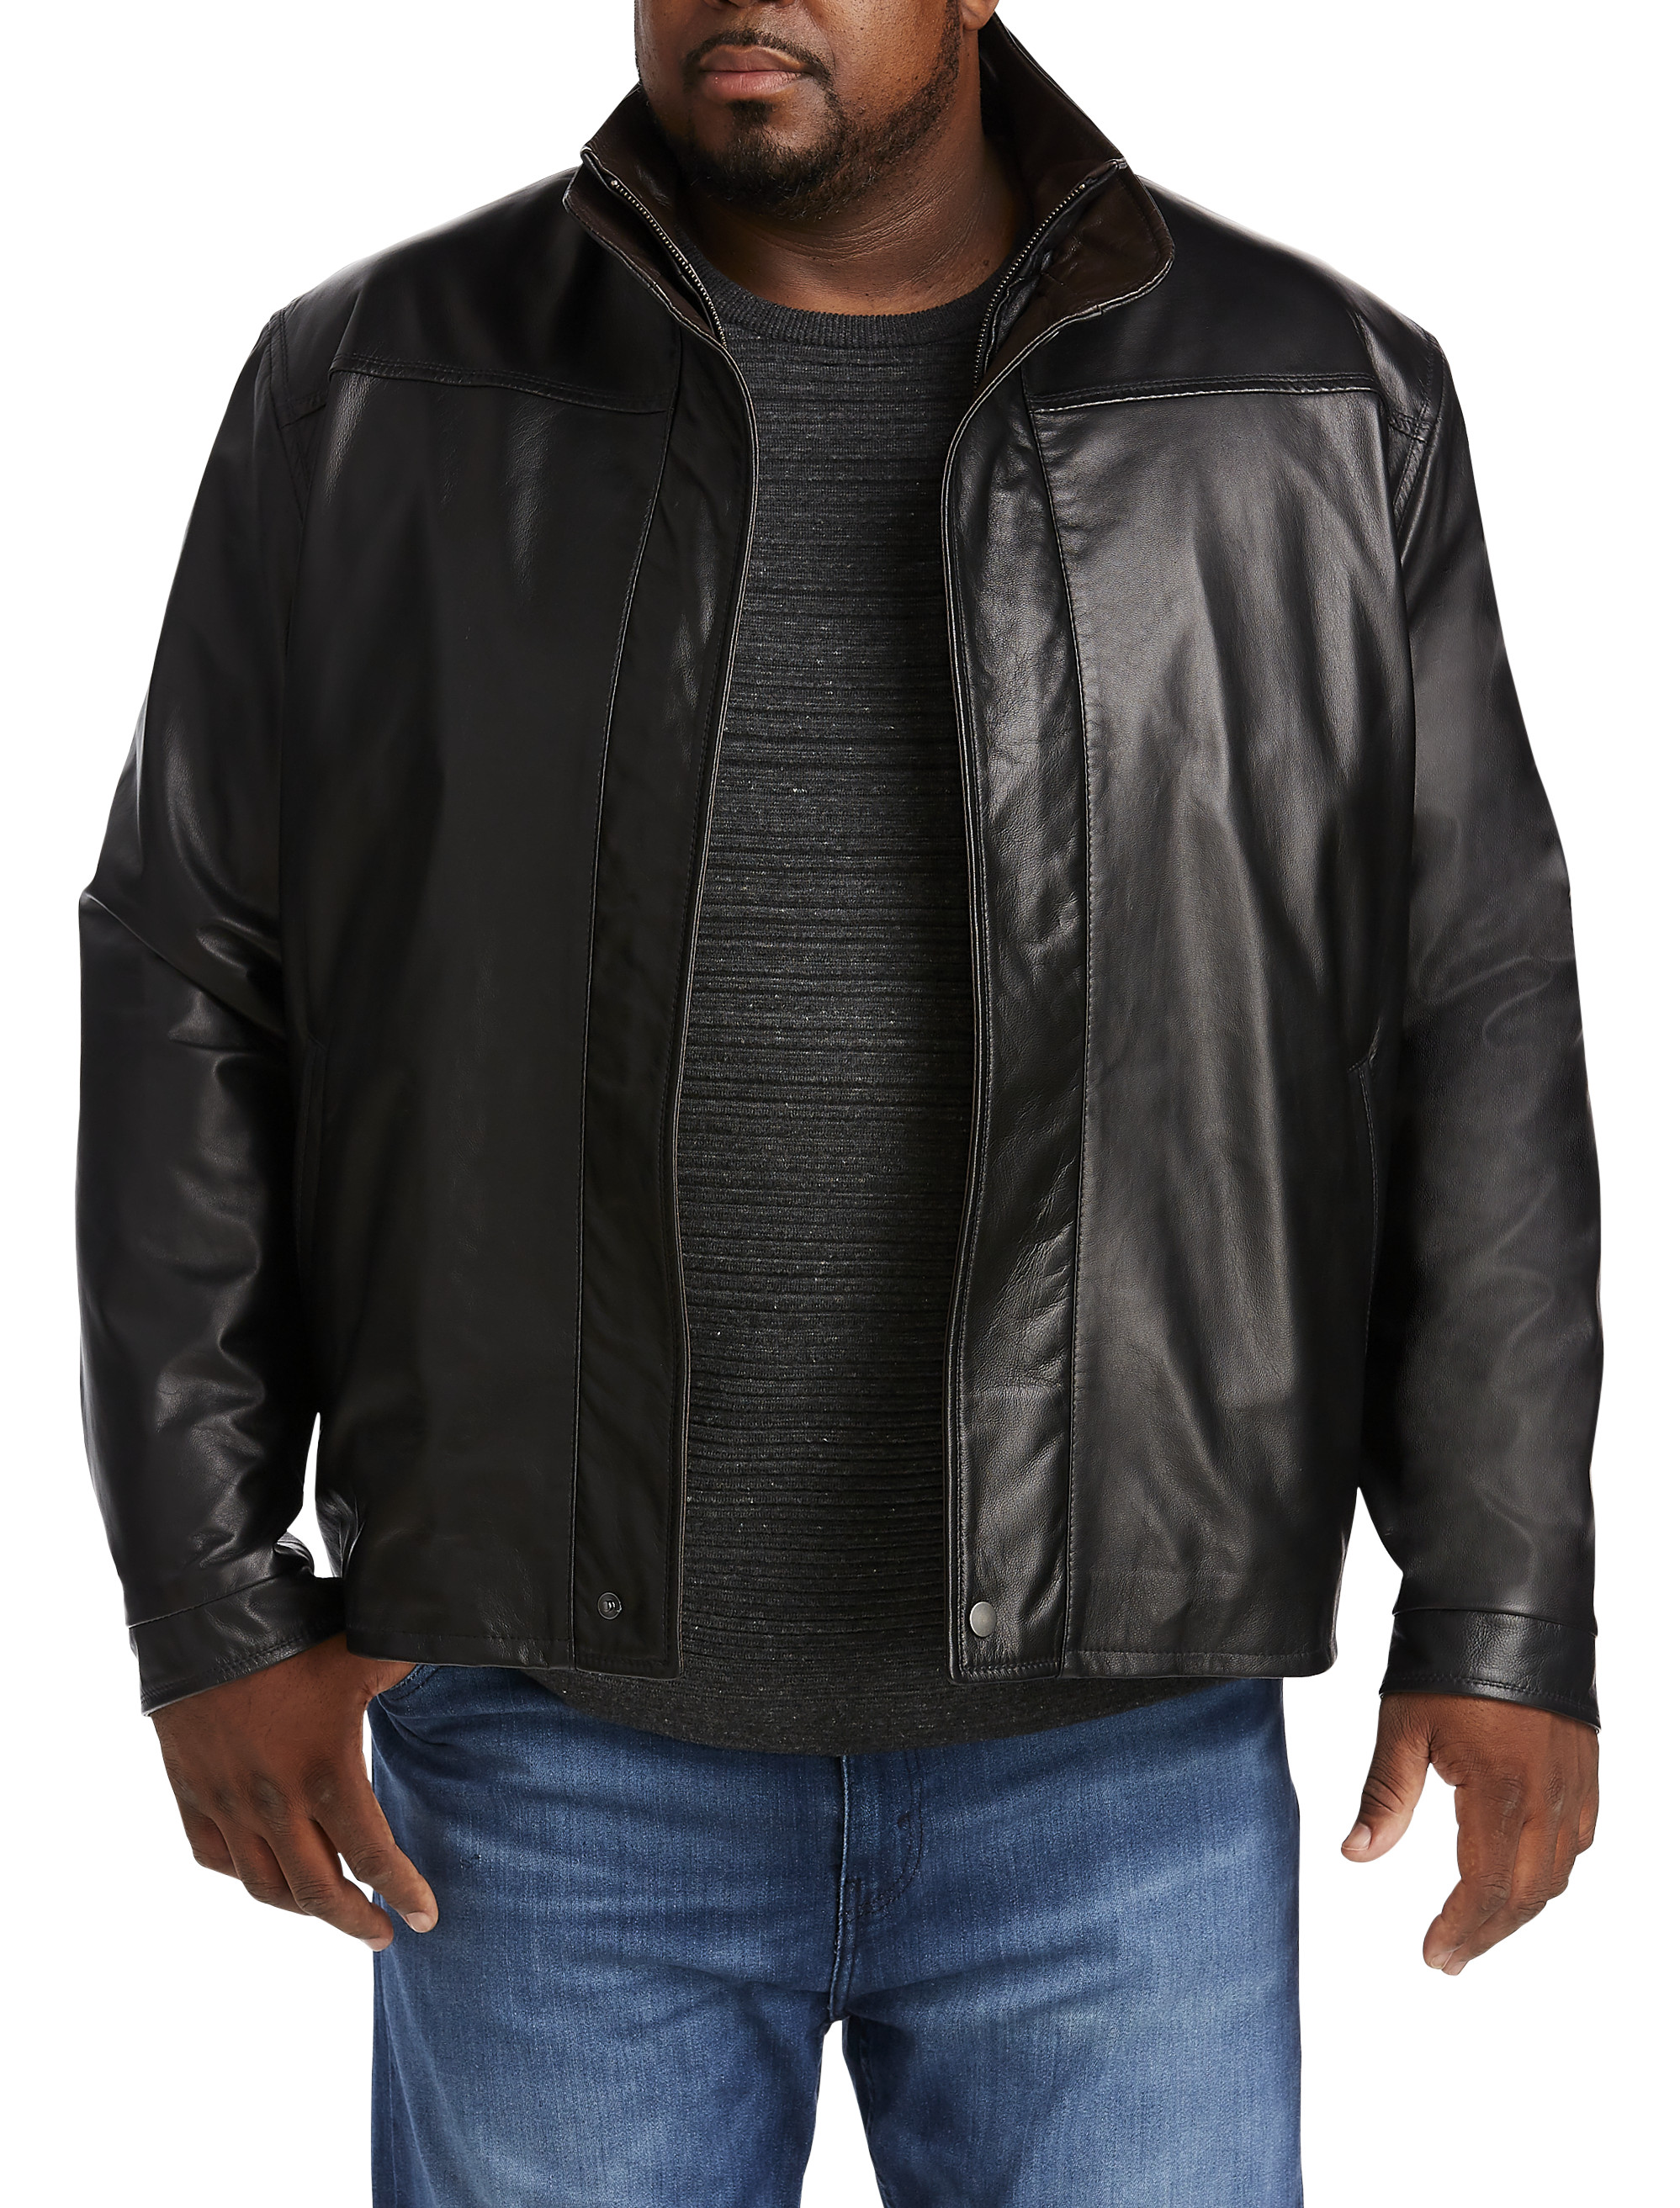 Double-Collar Butterskin Leather Jacket